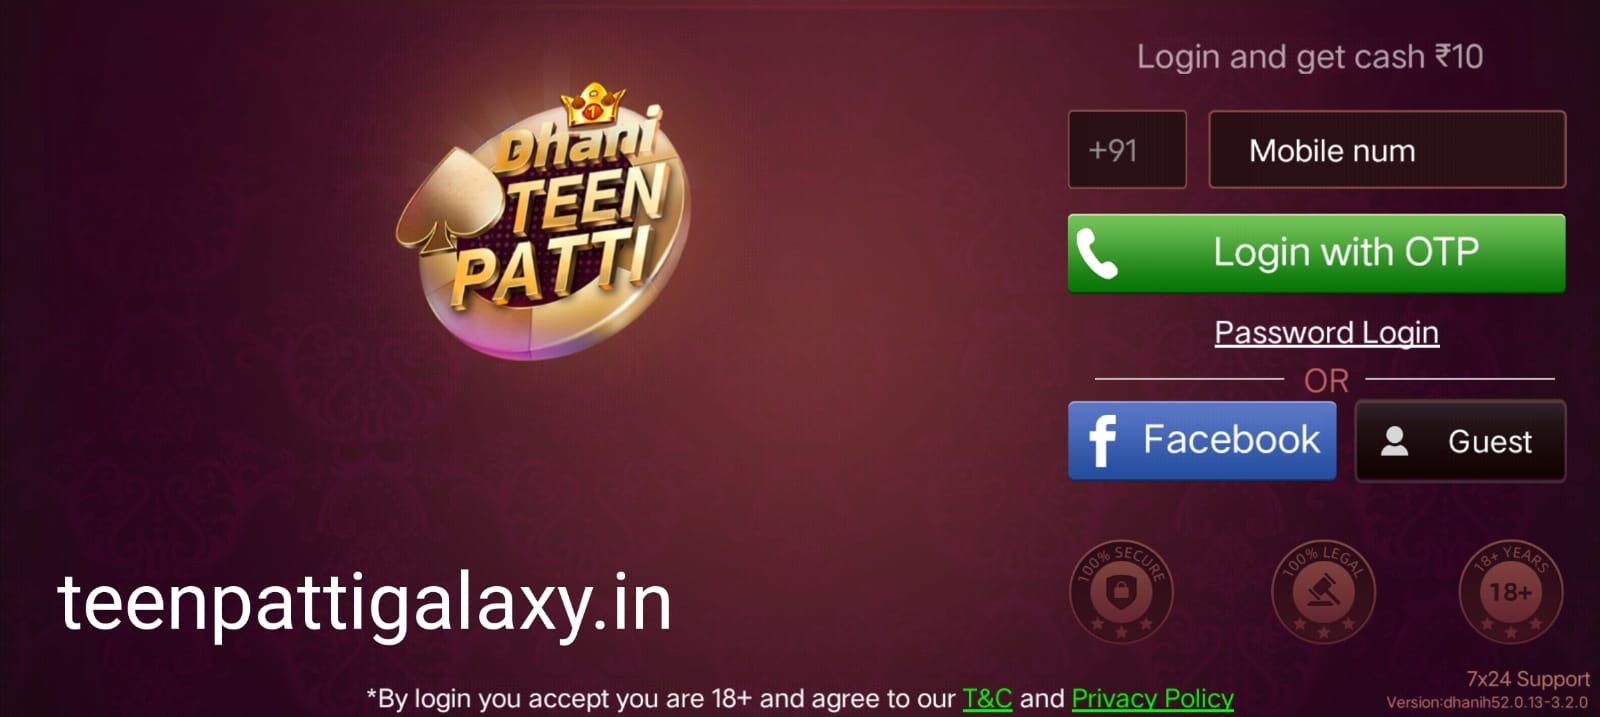 Register A New Account On Teen Patti Dhani Application